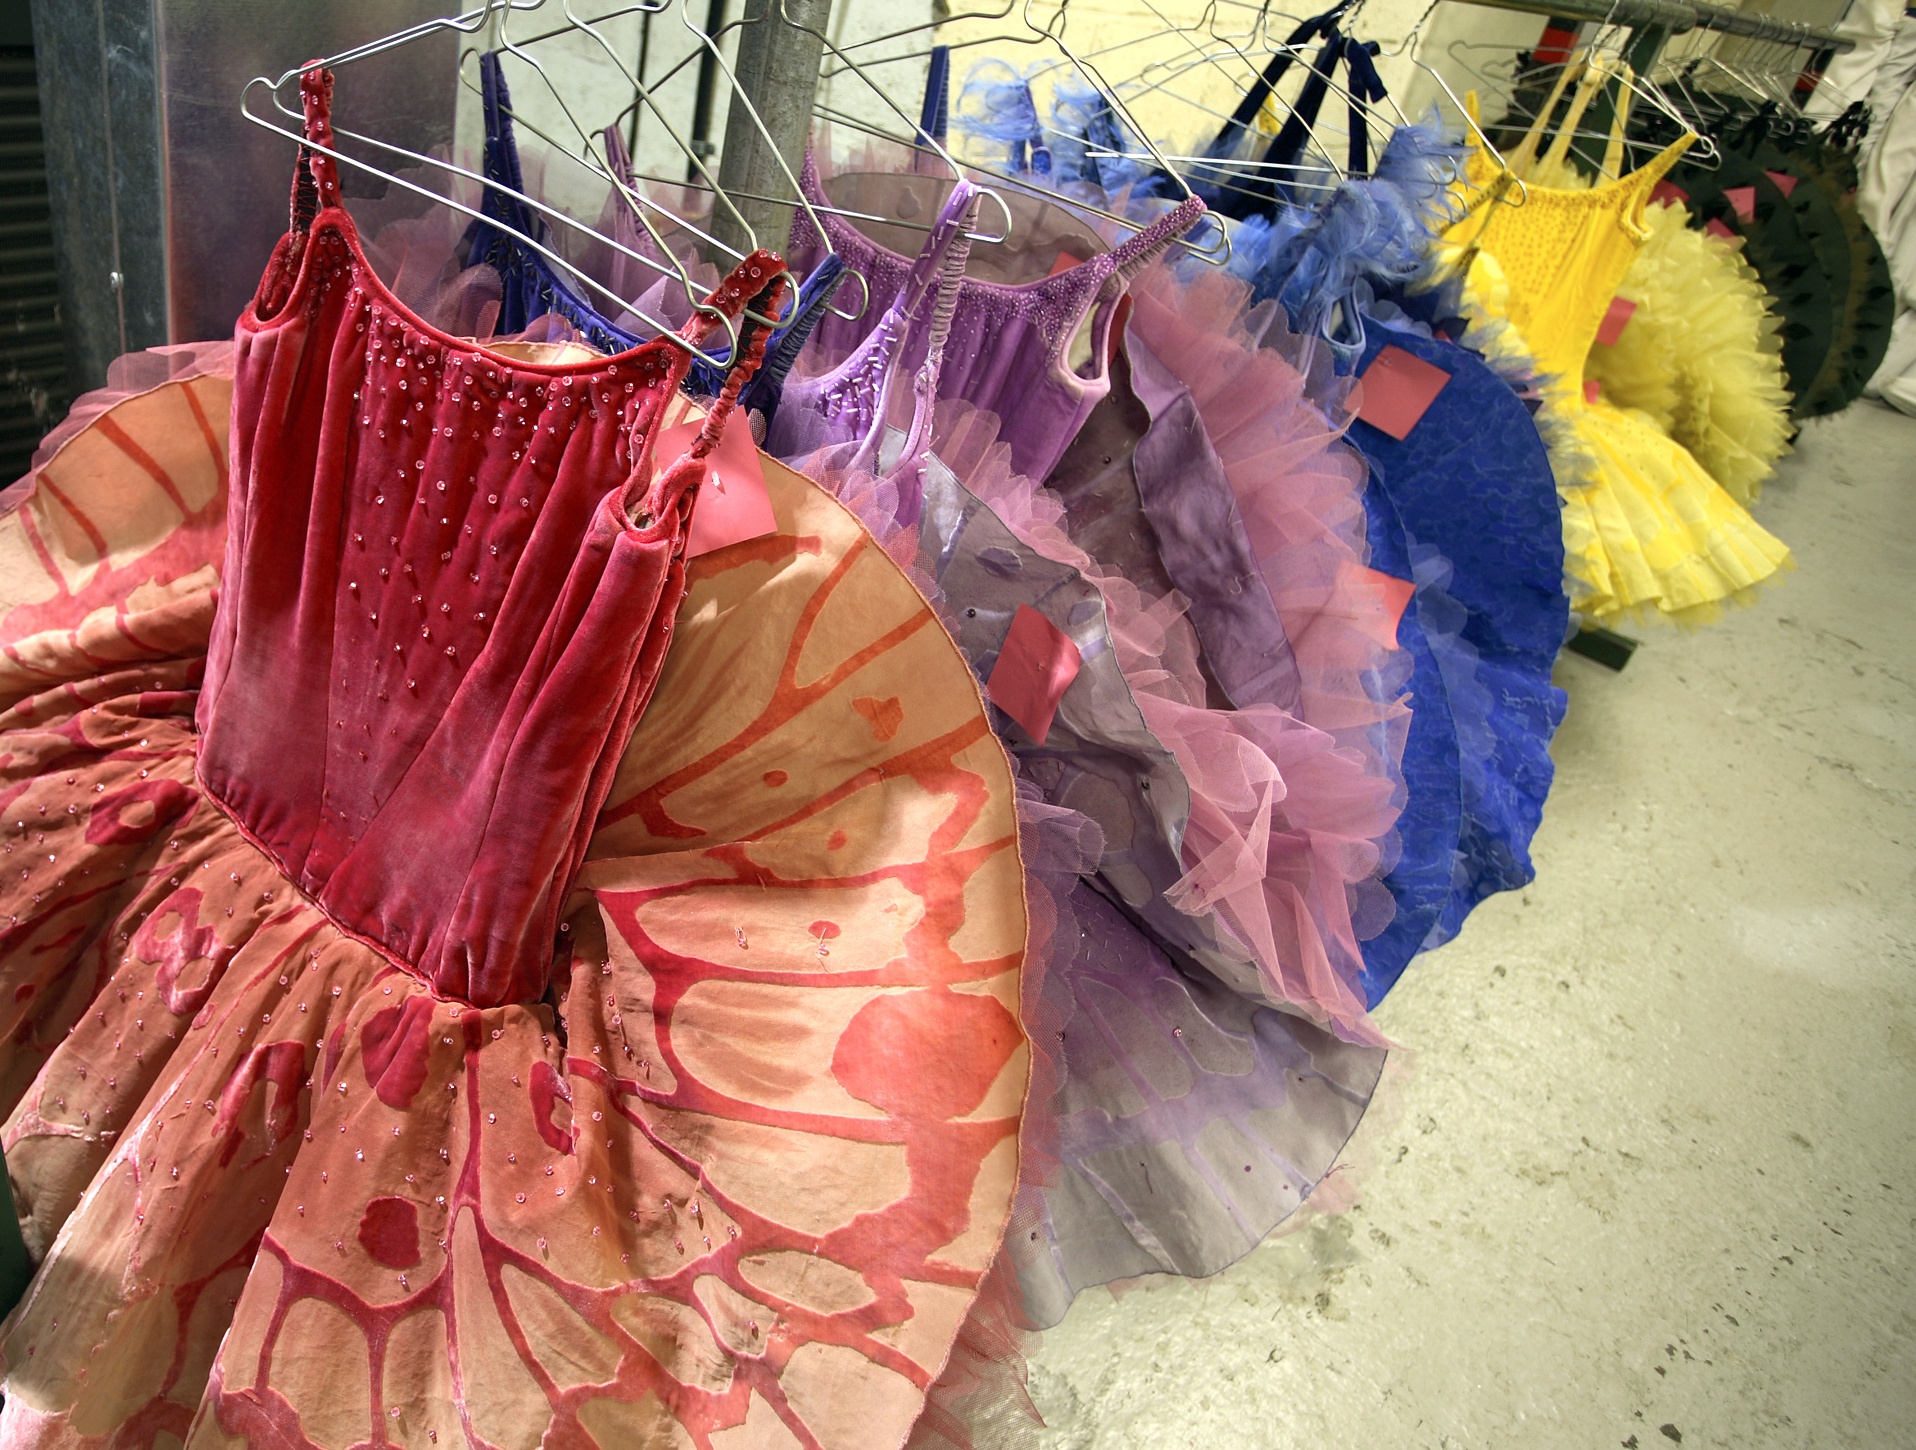 Ballet tutus in rainbow colors hang on a garment rack.